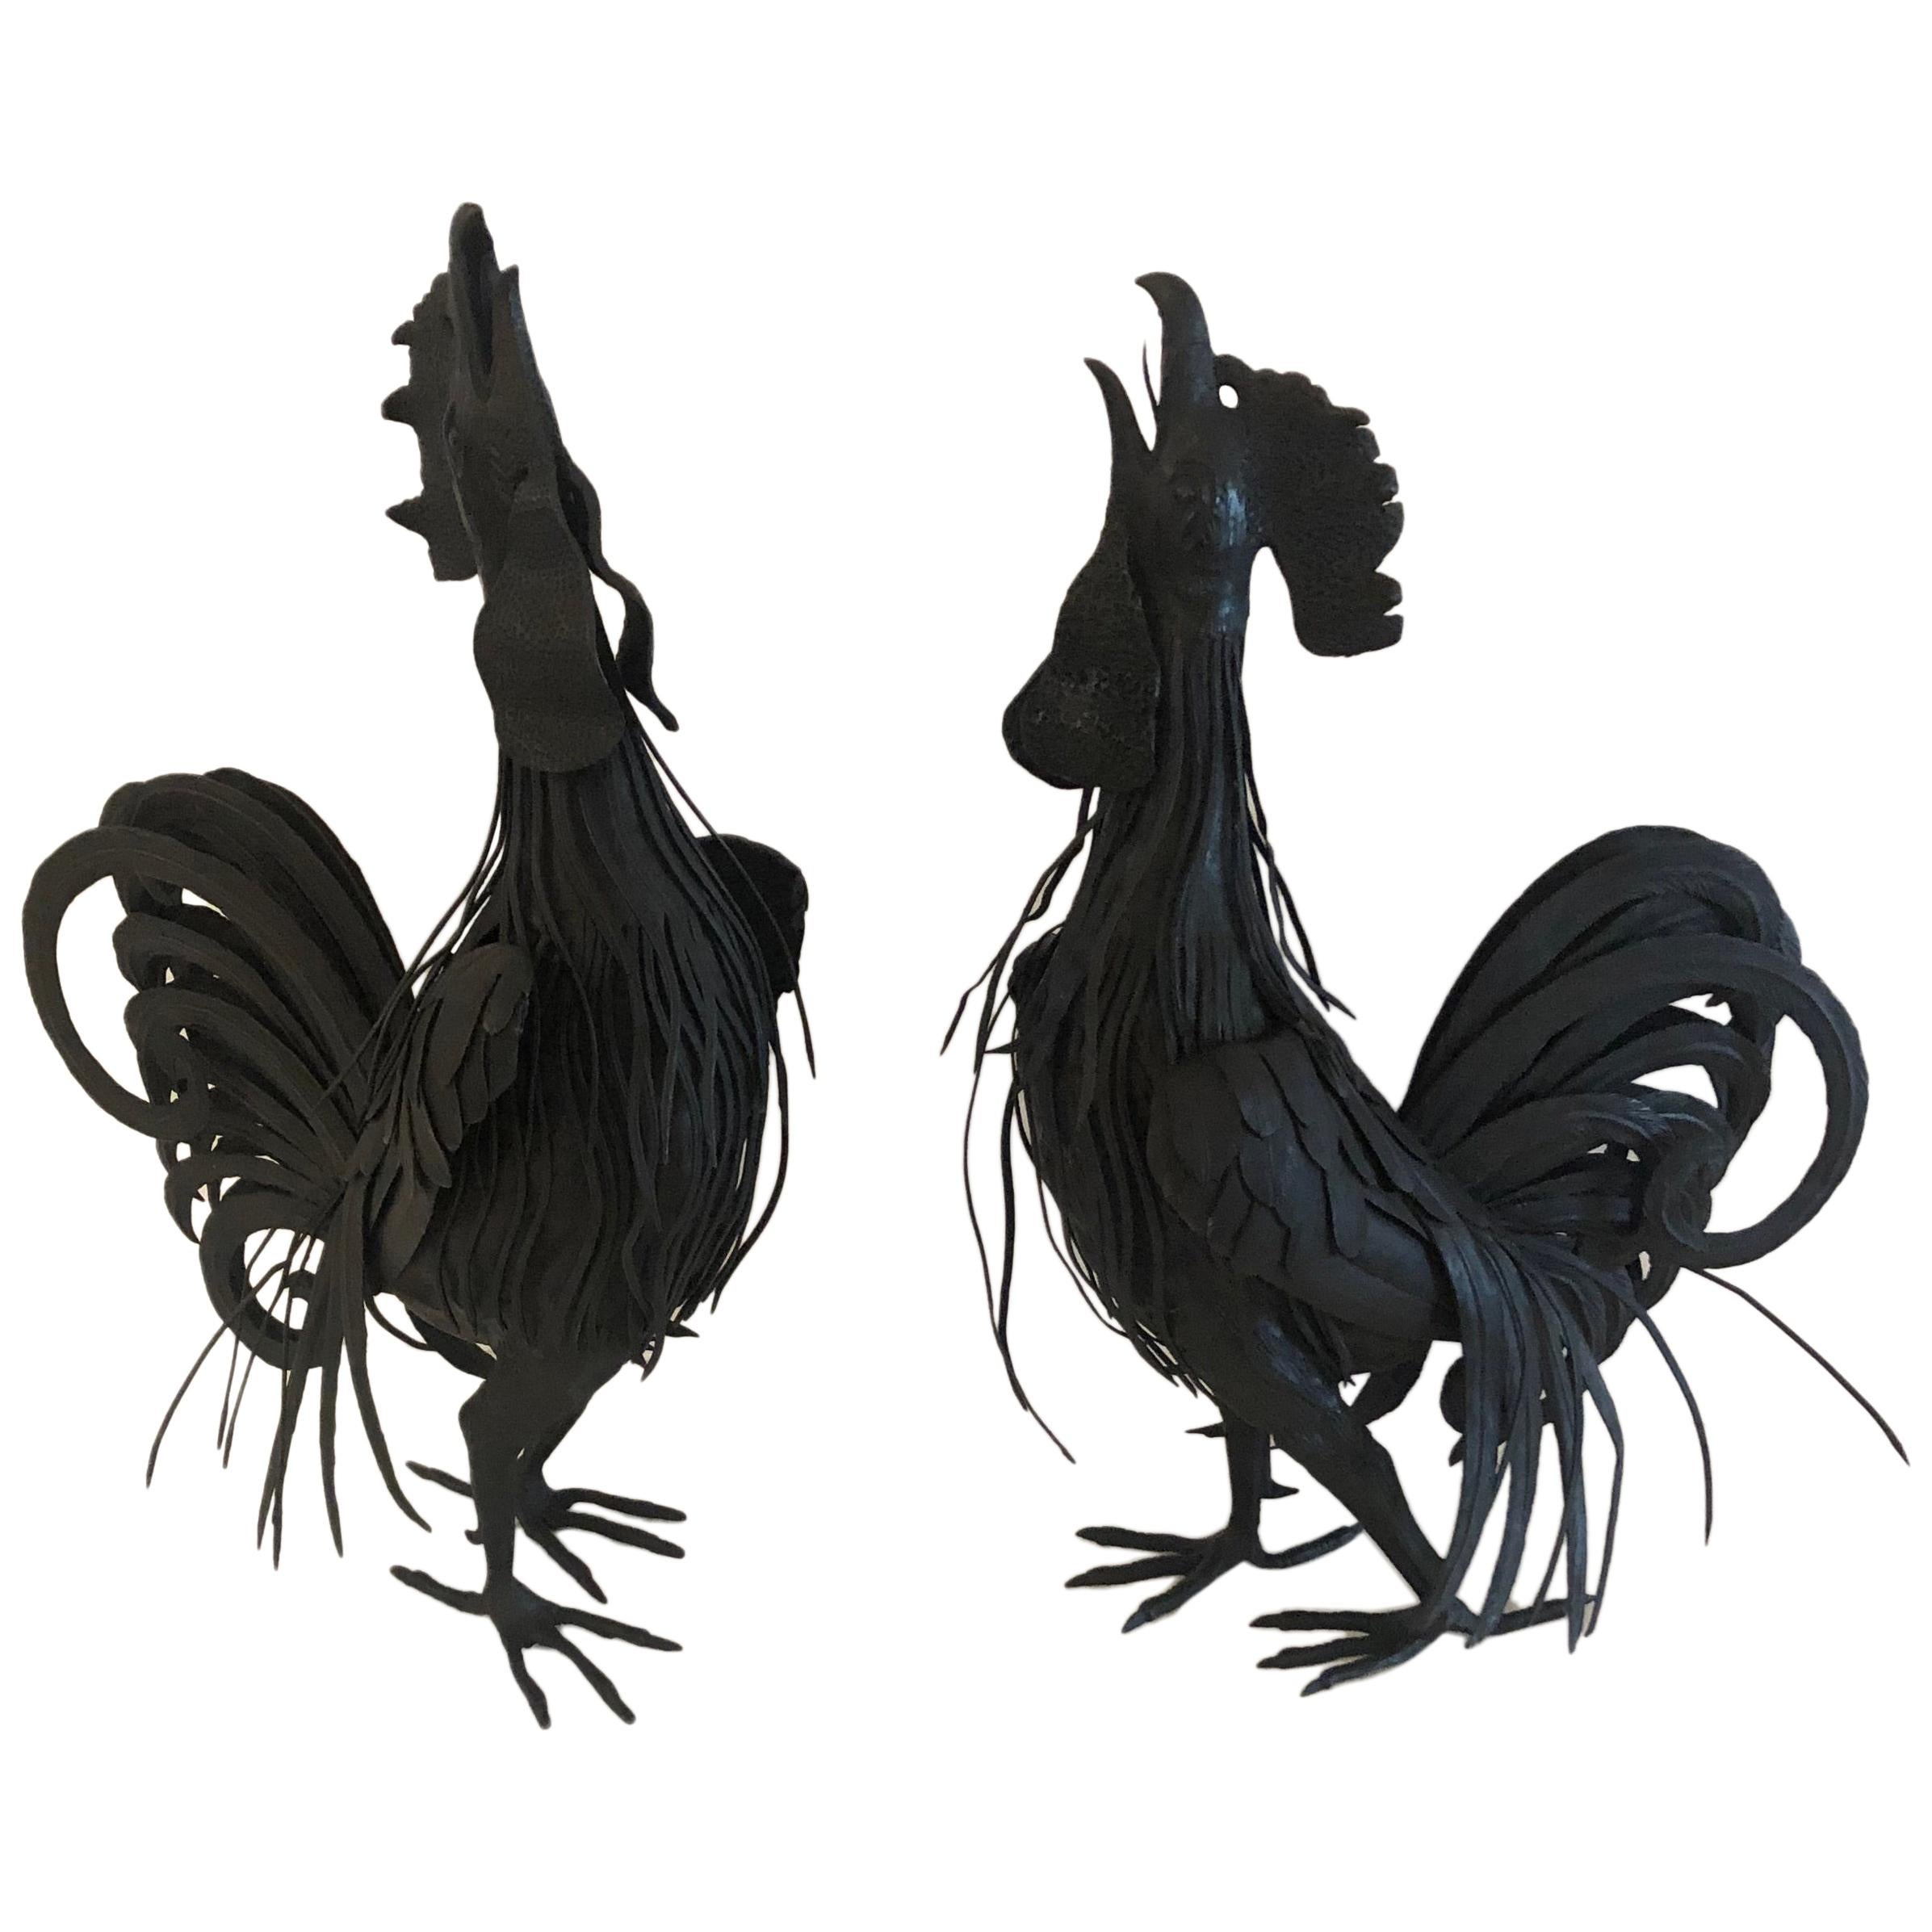 Marvelous Pair of Hand Forged Iron Rooster Sculptures